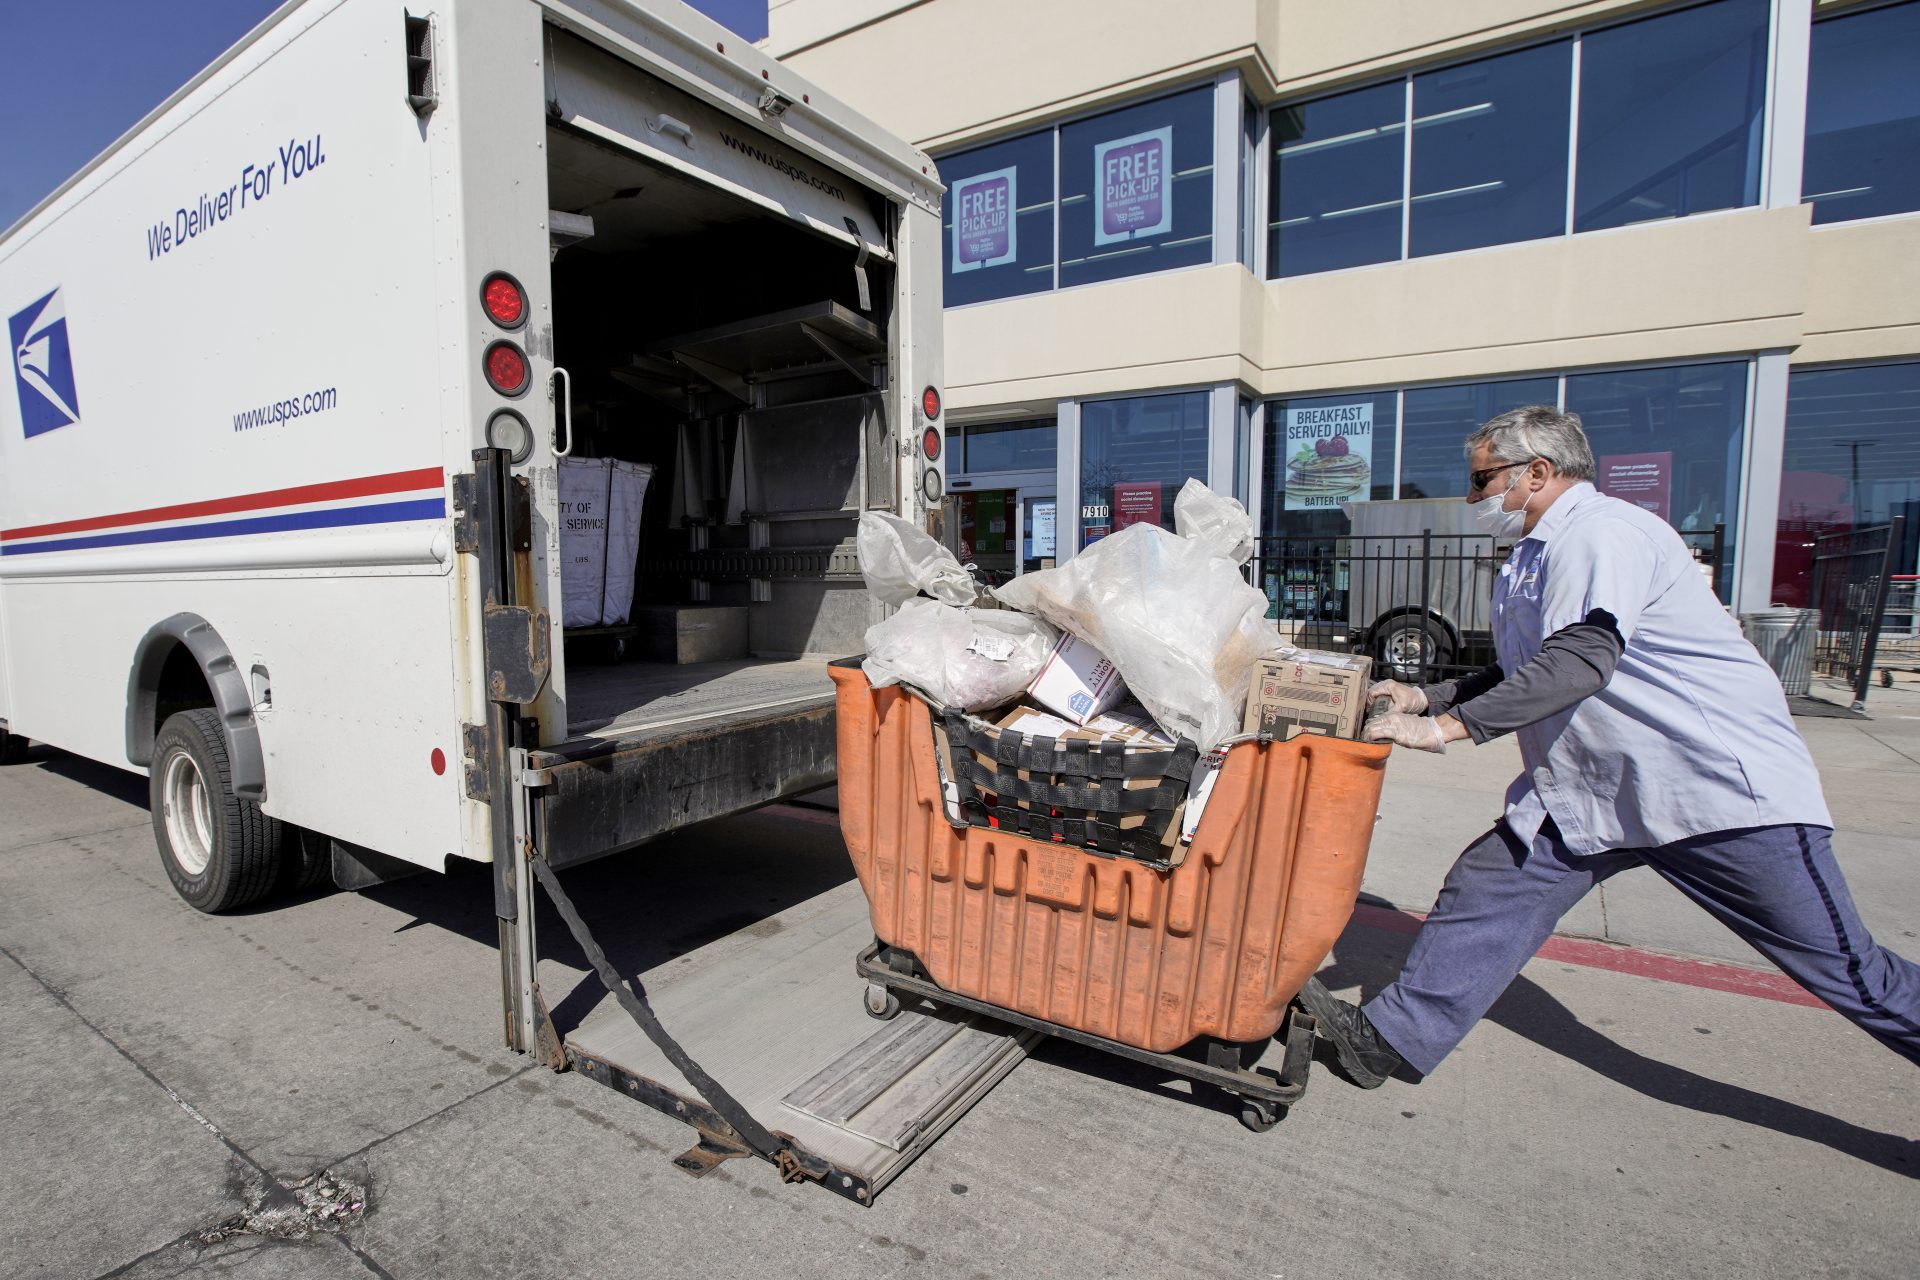 A postal worker wears protective gear against the coronavirus as he collects articles of mail outside a supermarket in Omaha, Neb., Friday, April 10, 2020.